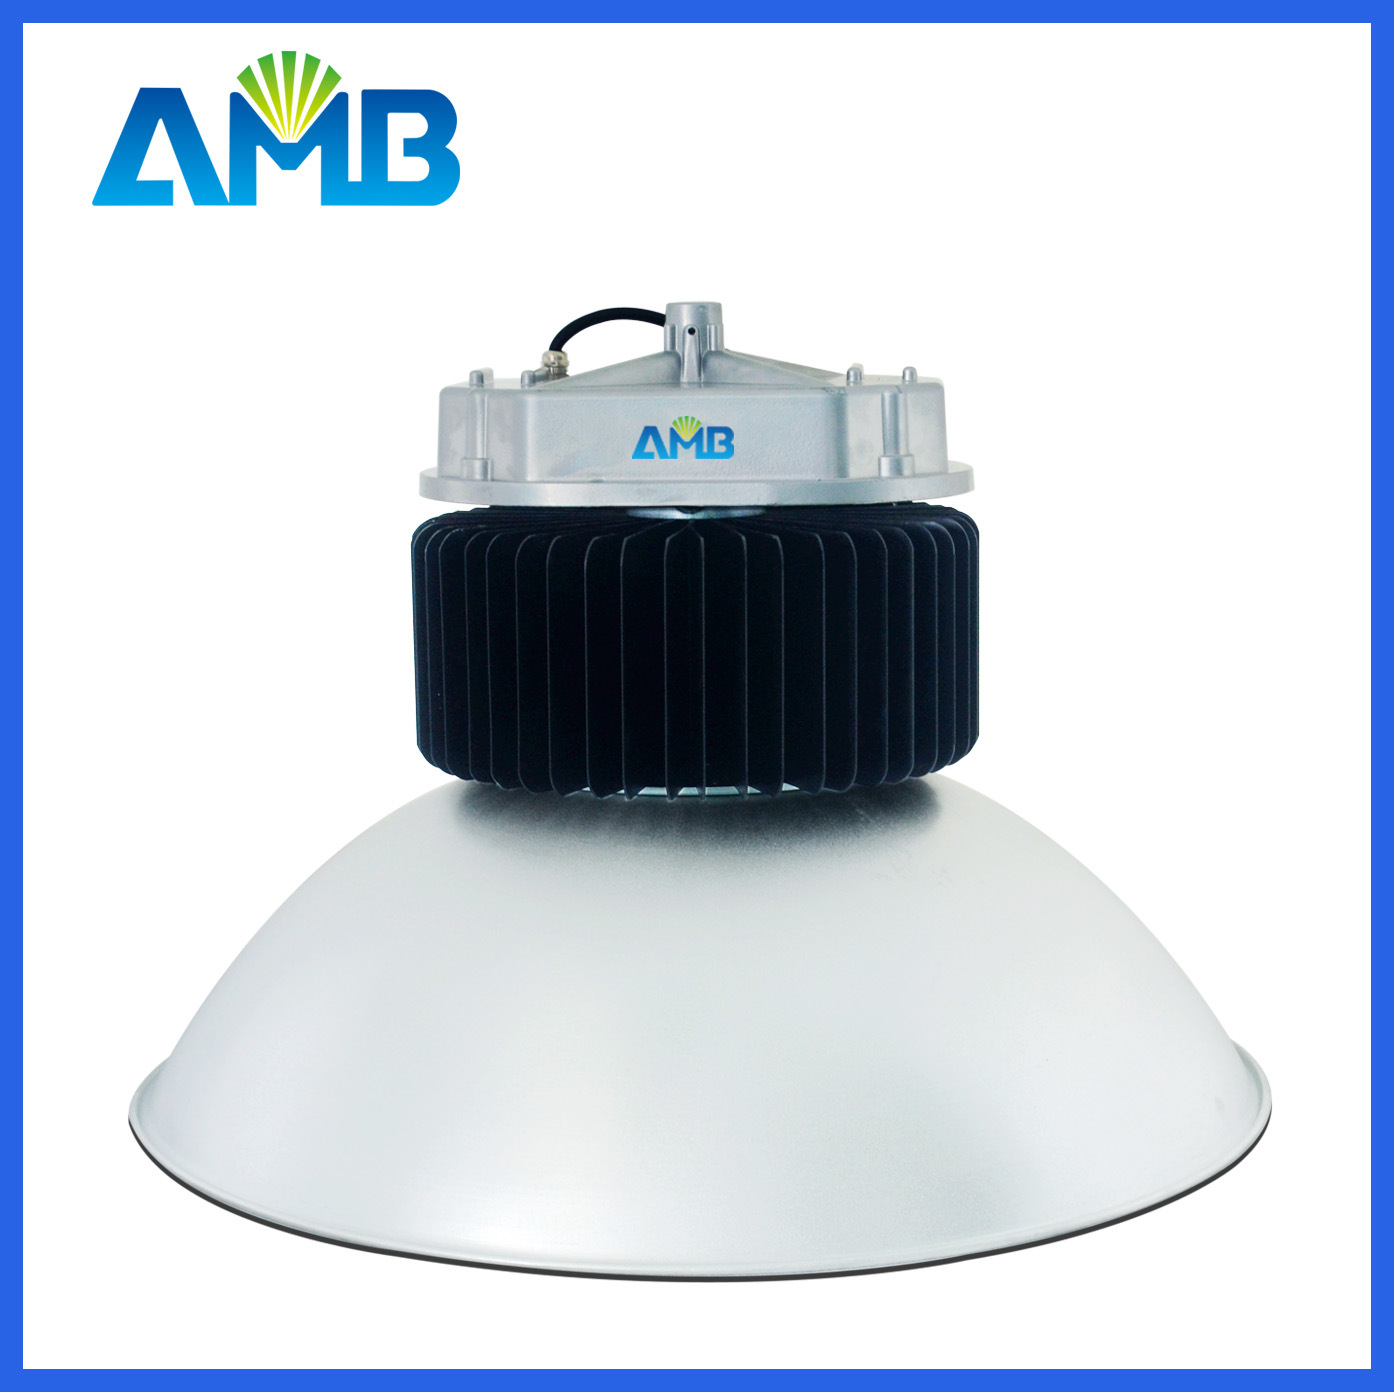 200W LED High Bay Light with UL and SAA Certs